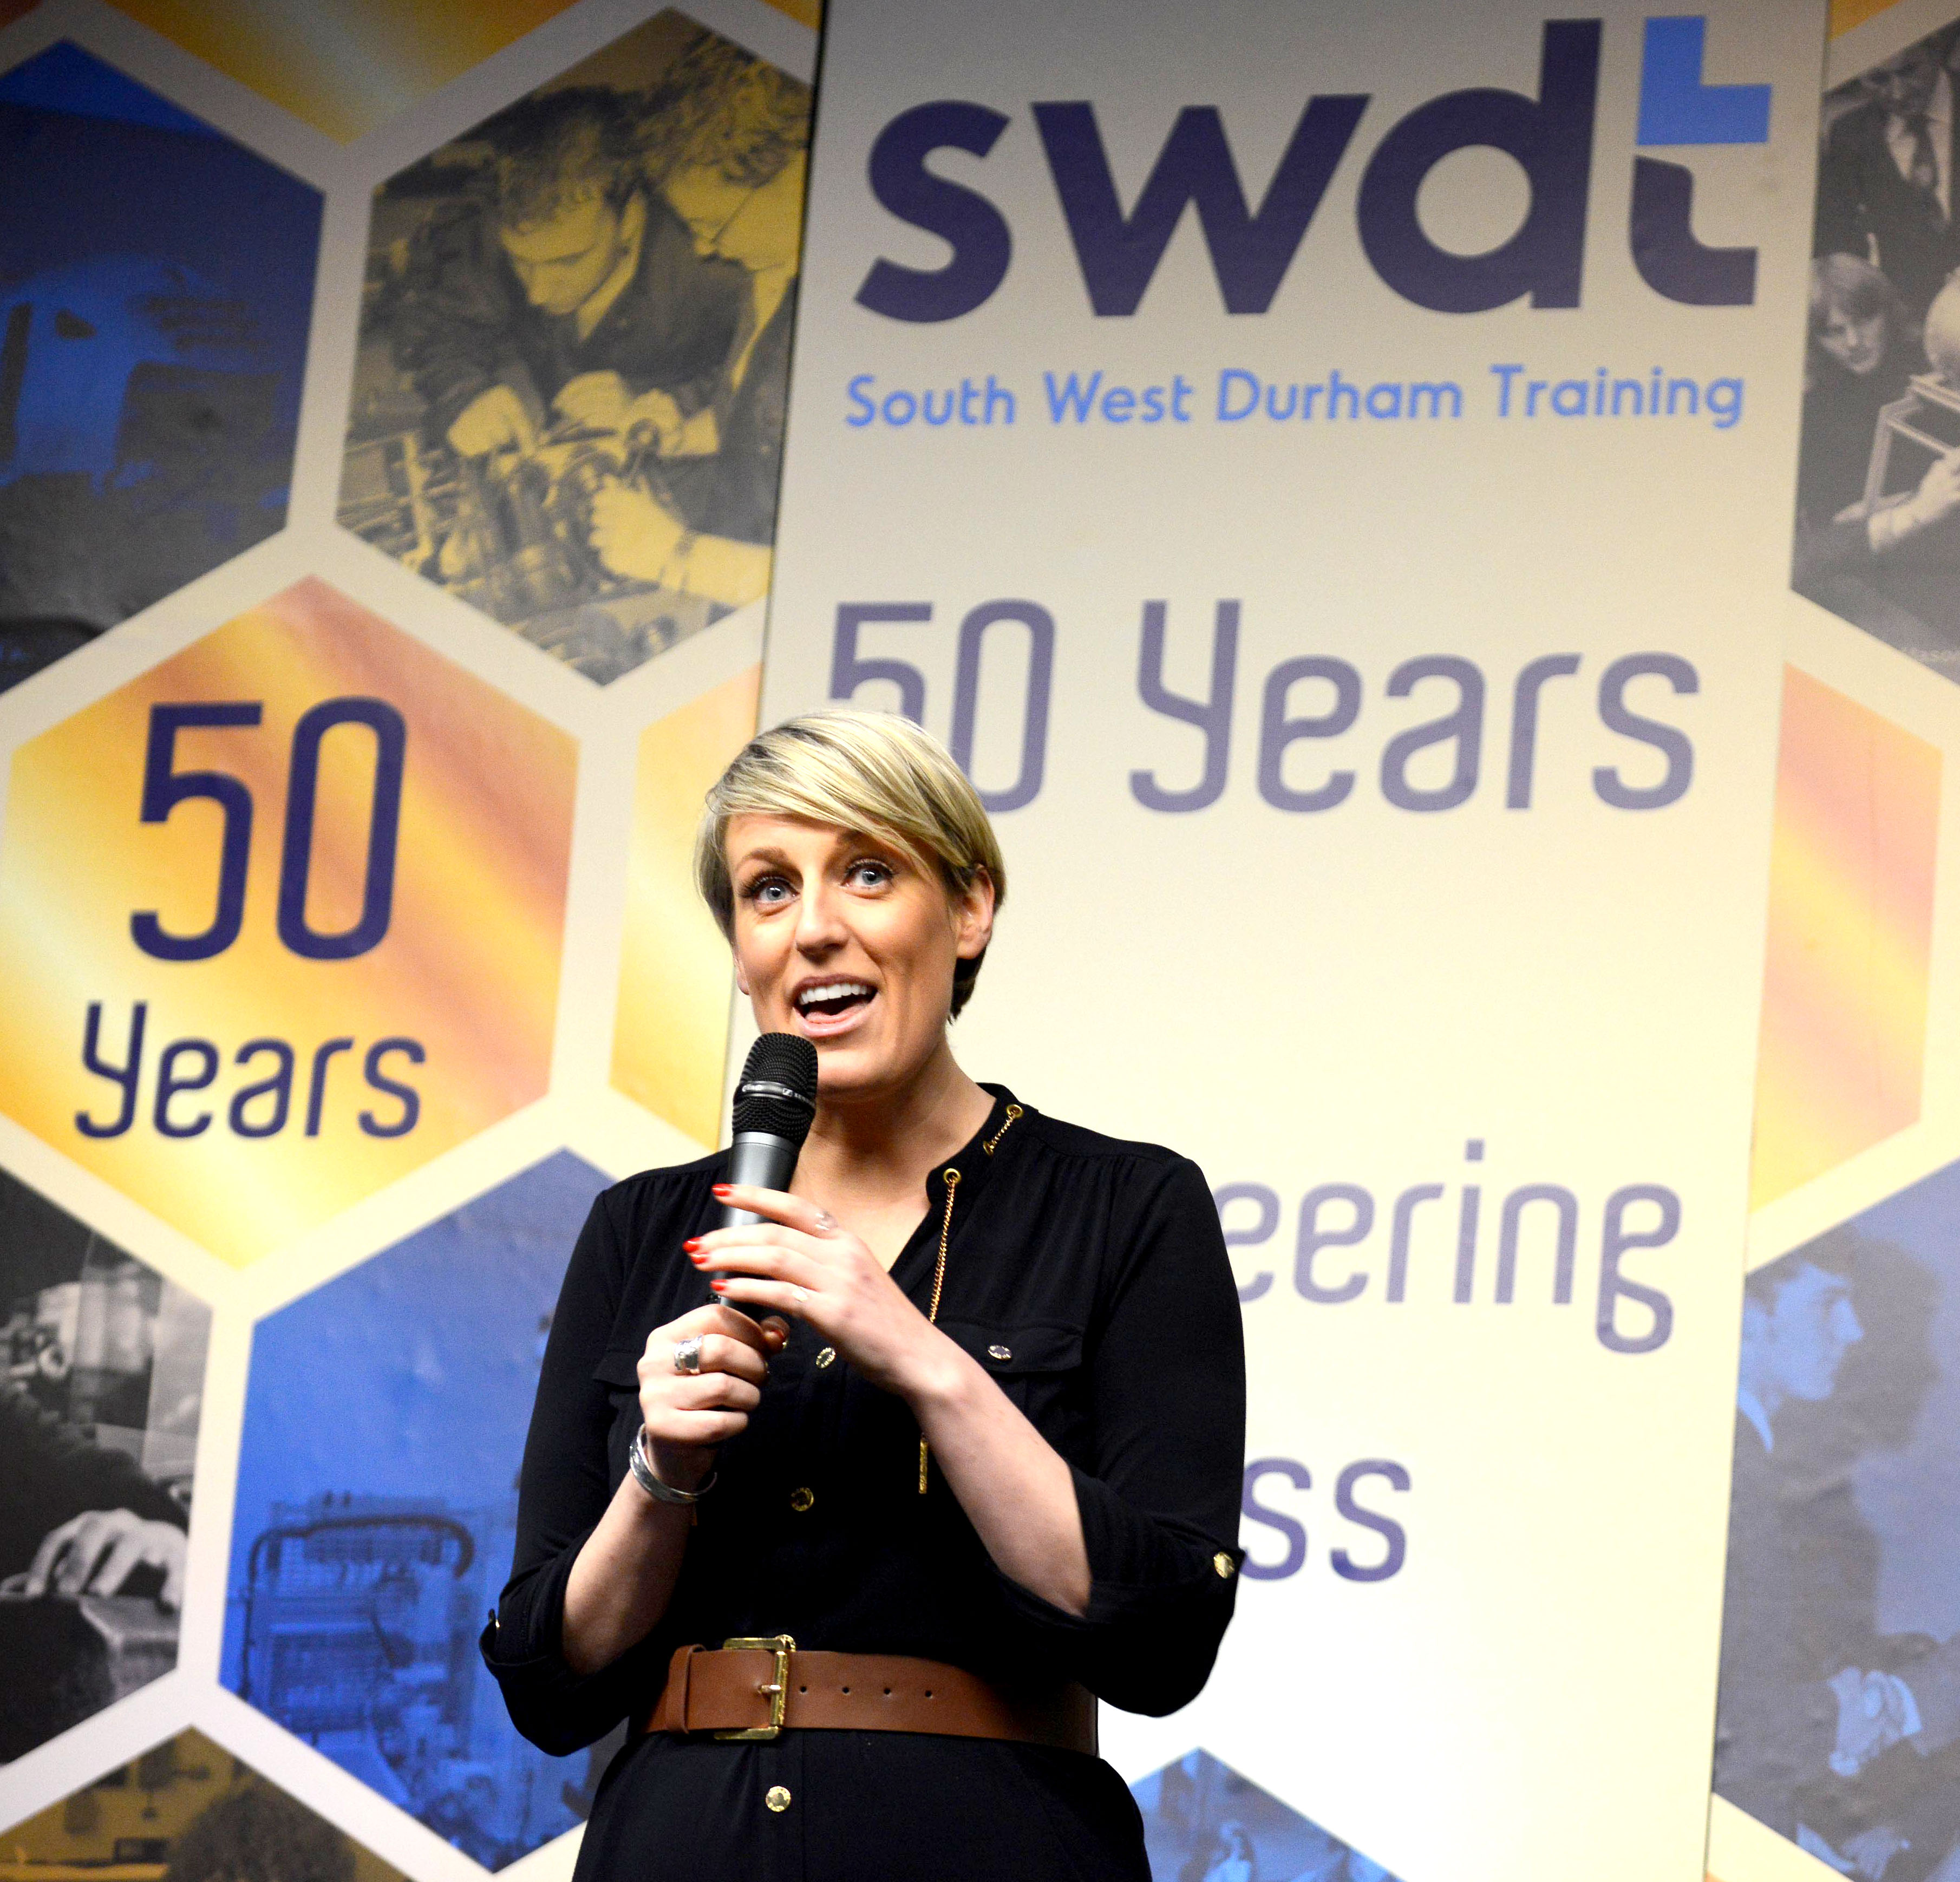 Aycliffe SWDT’s 50th Anniversary